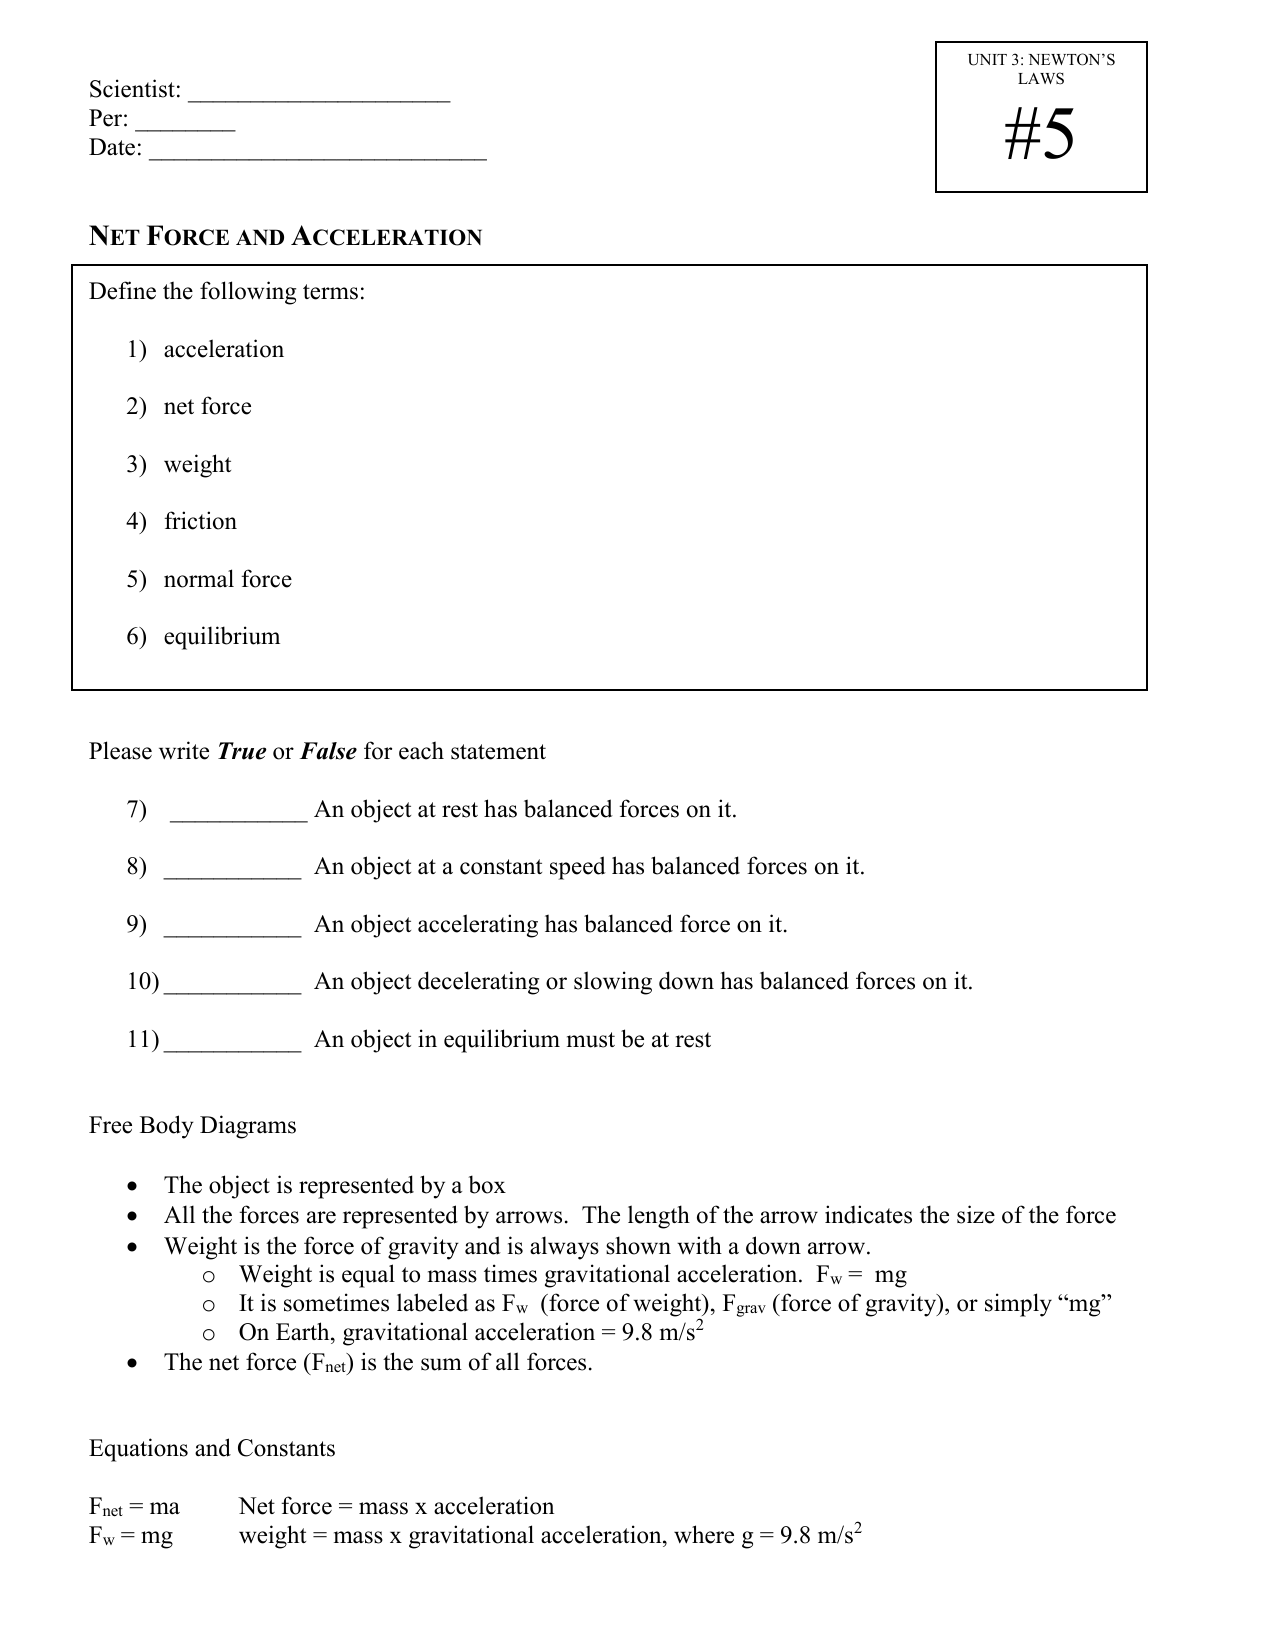 Weight Friction And Equilibrium Worksheet Answers - worksheet